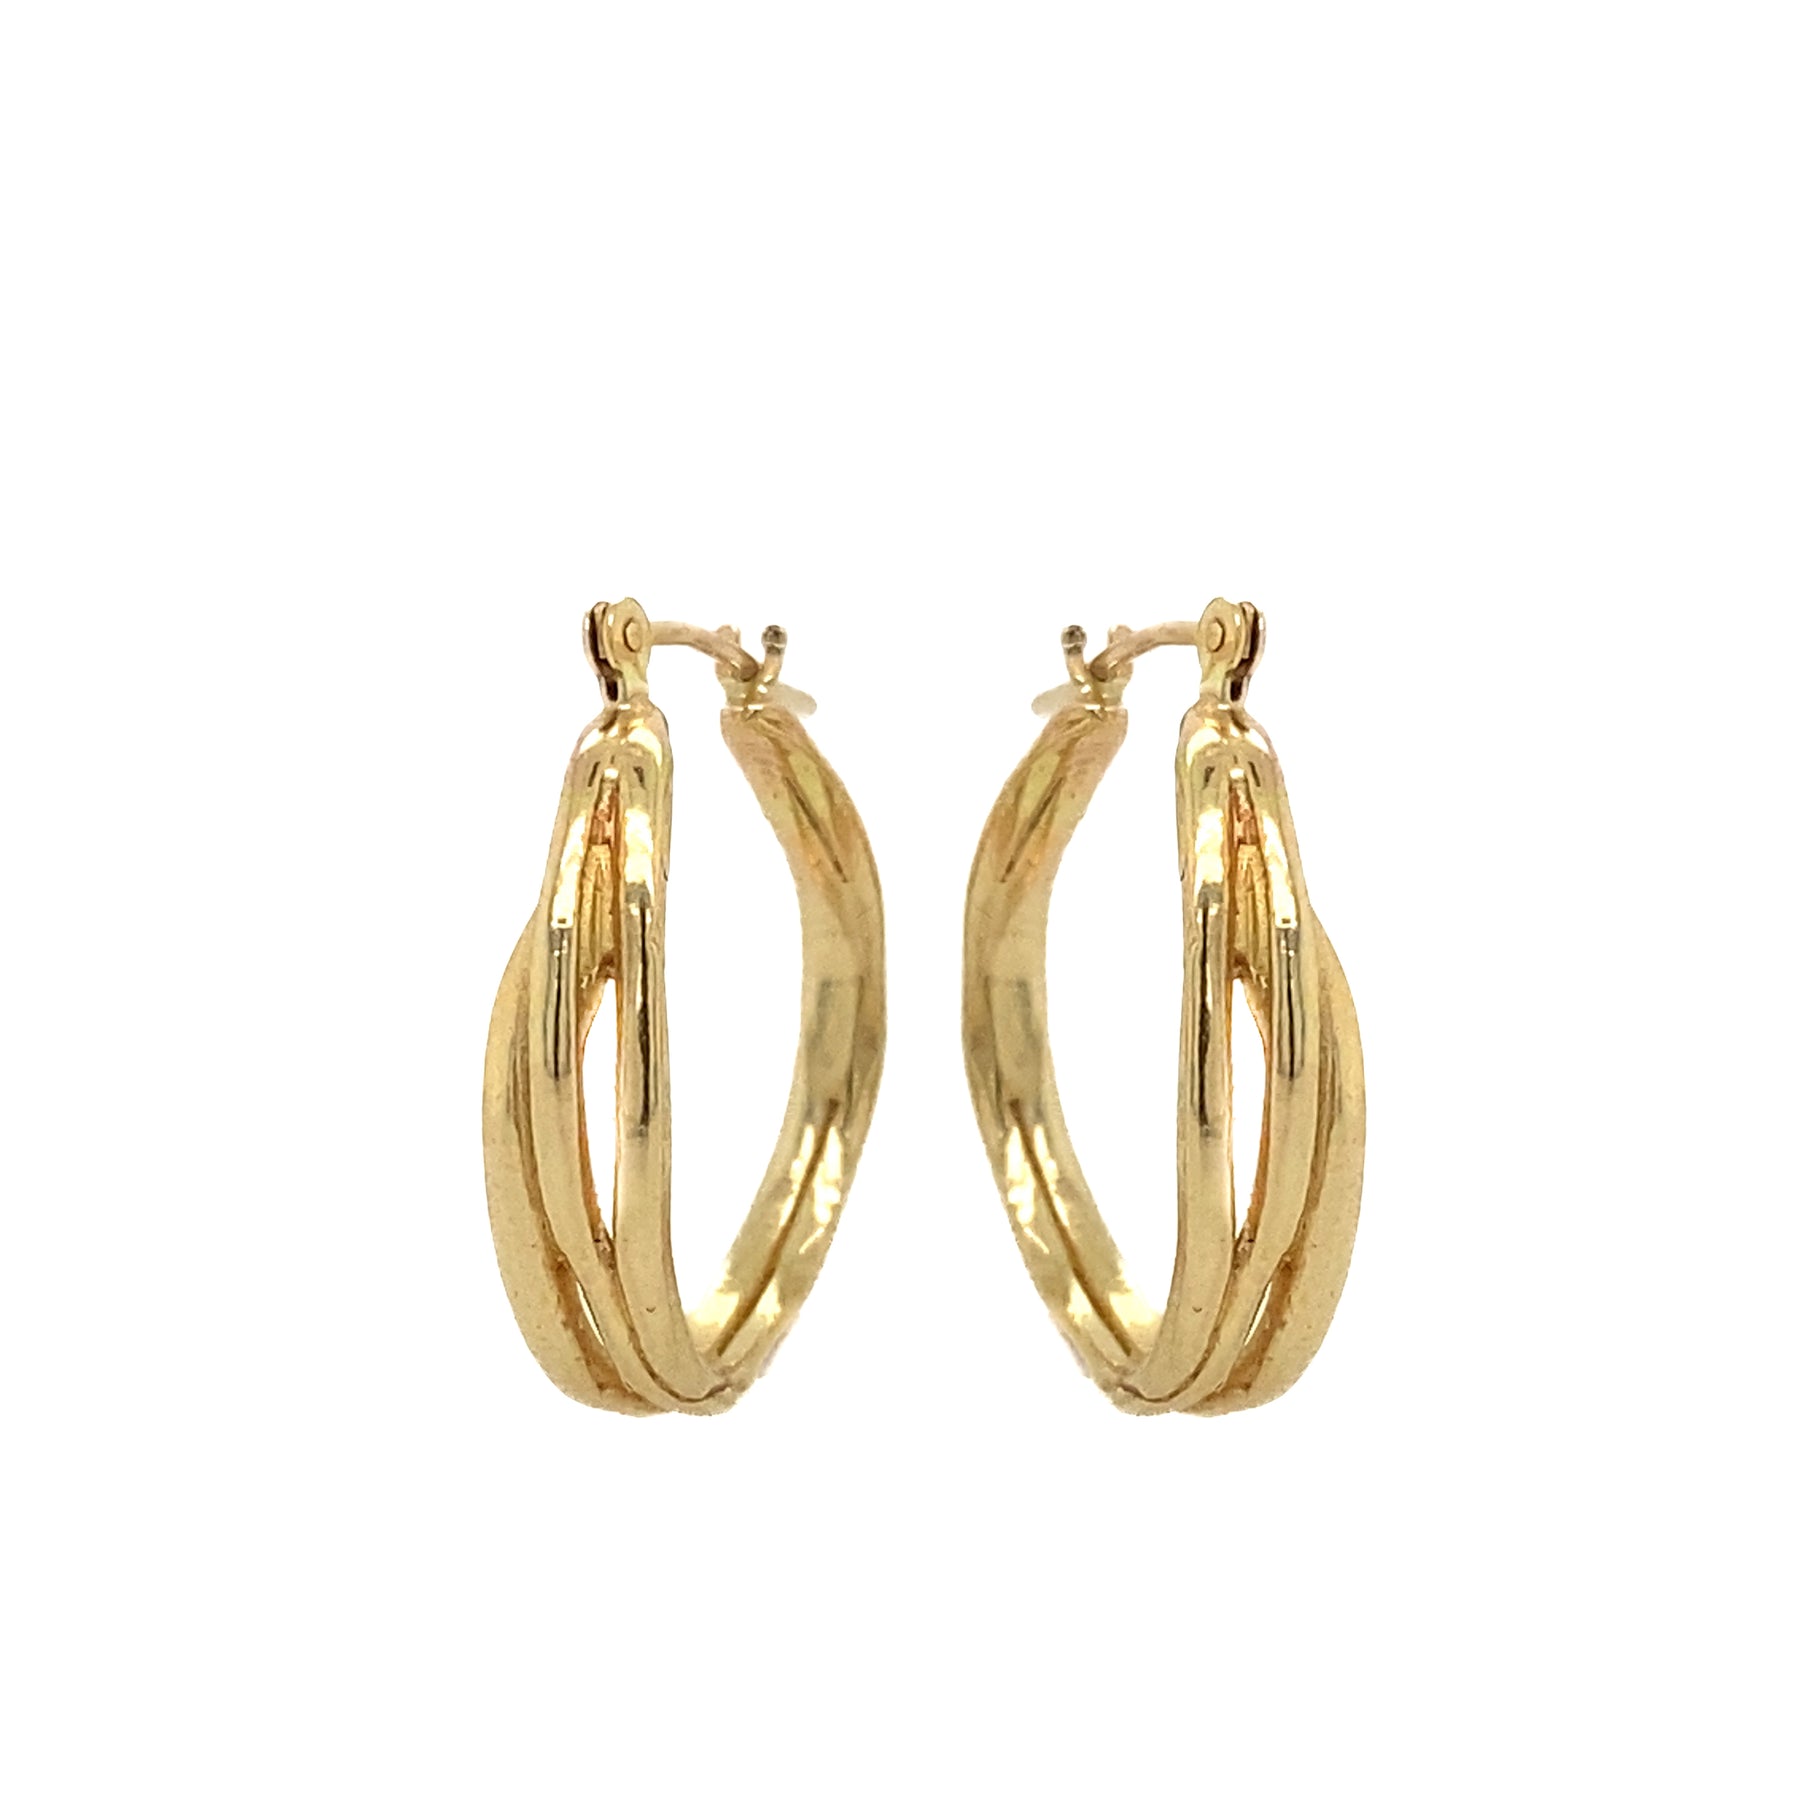 Shop Our Earrings | Emily Amey – Page 2 – Emily Amey